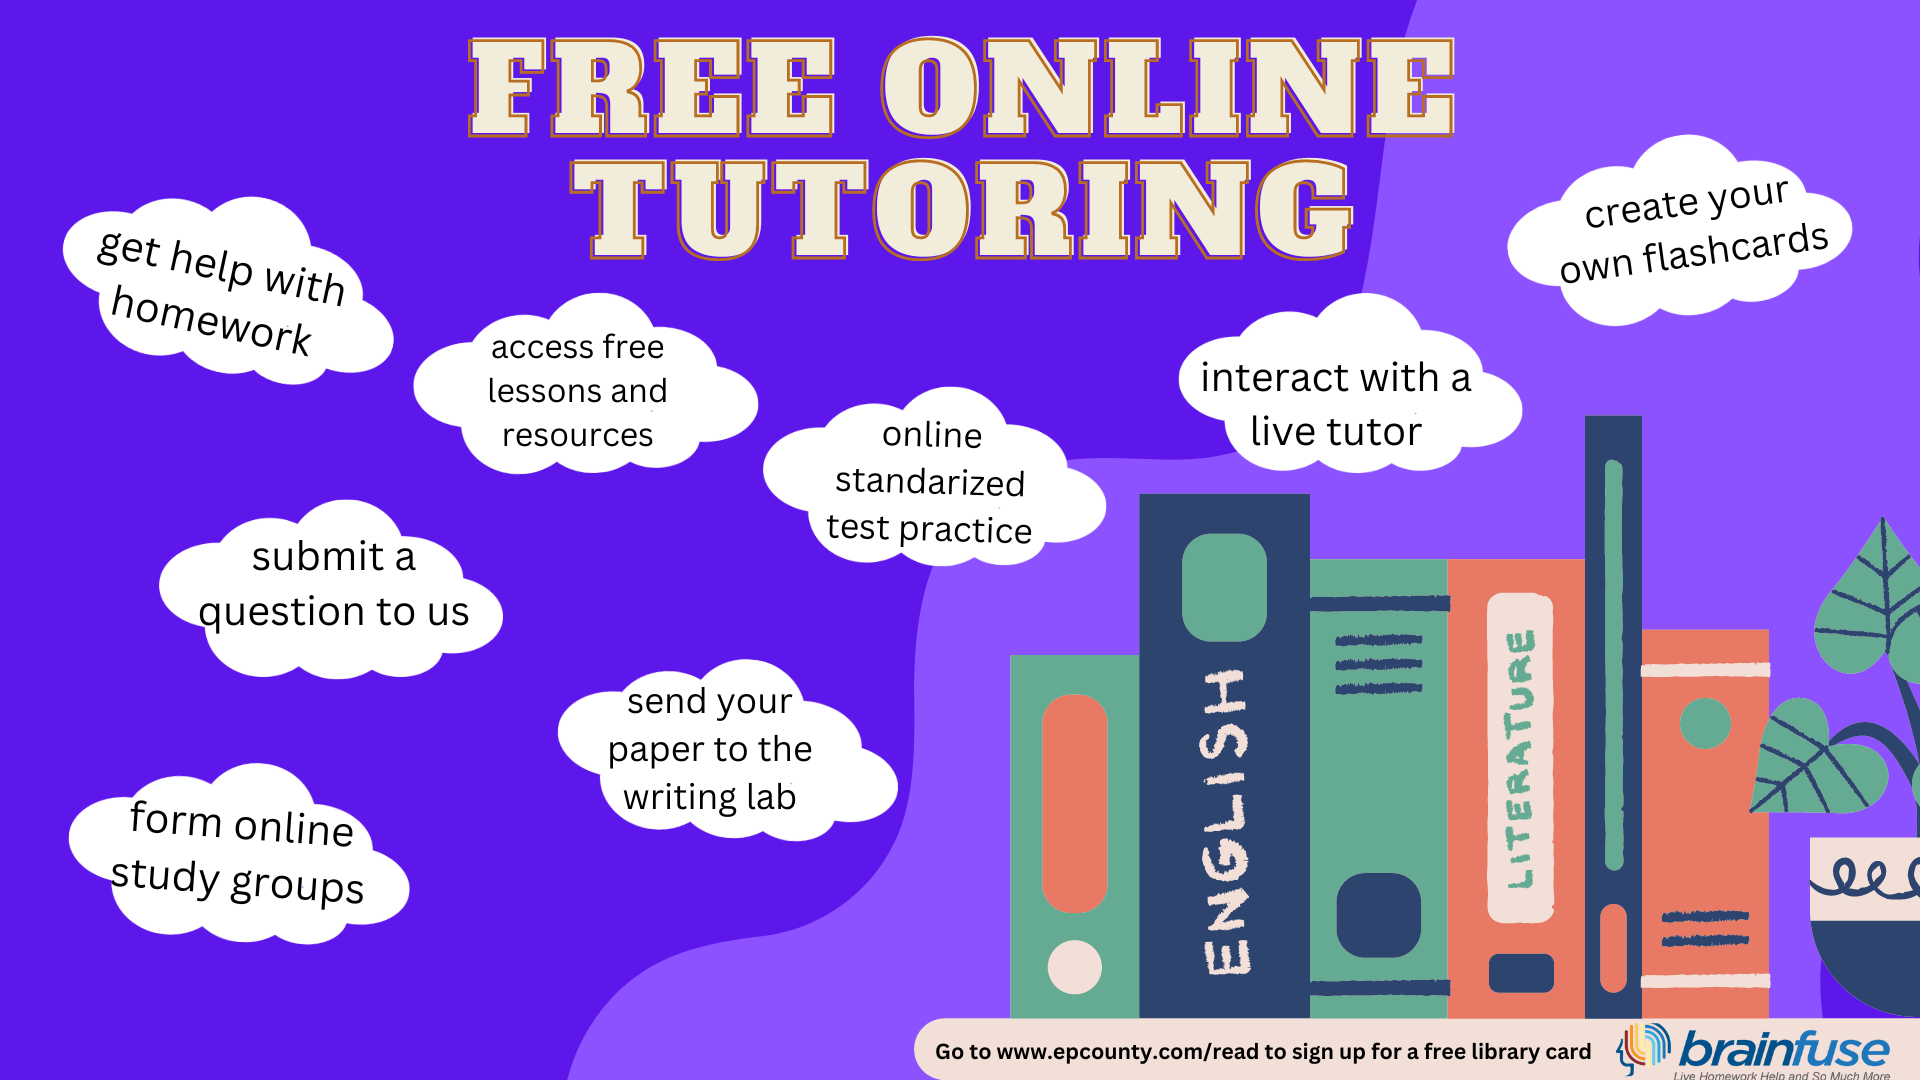 banner for brainfuse reading Free Online Tutoring and a list of services.